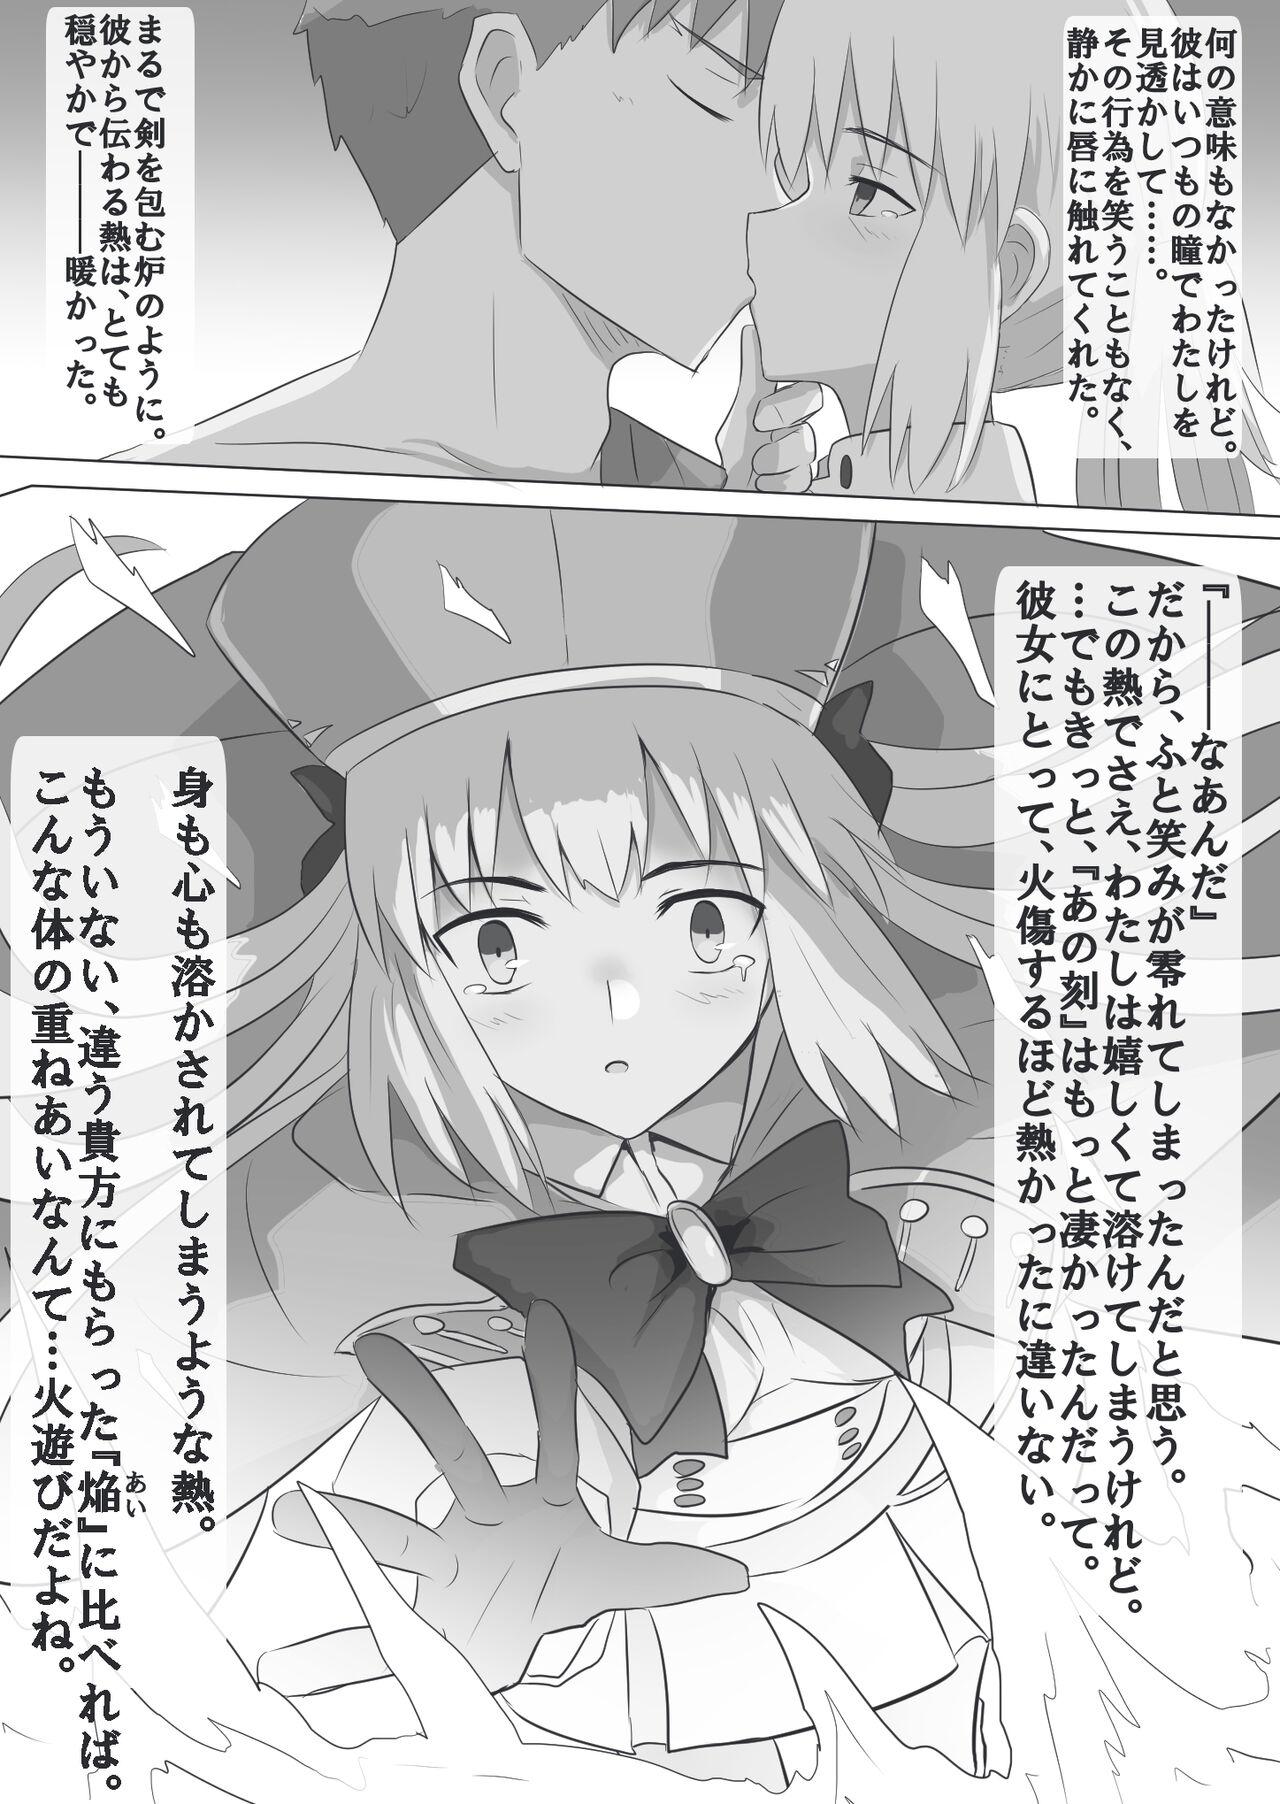 Thong MuraCas 7 - Fate grand order Chicks - Page 4